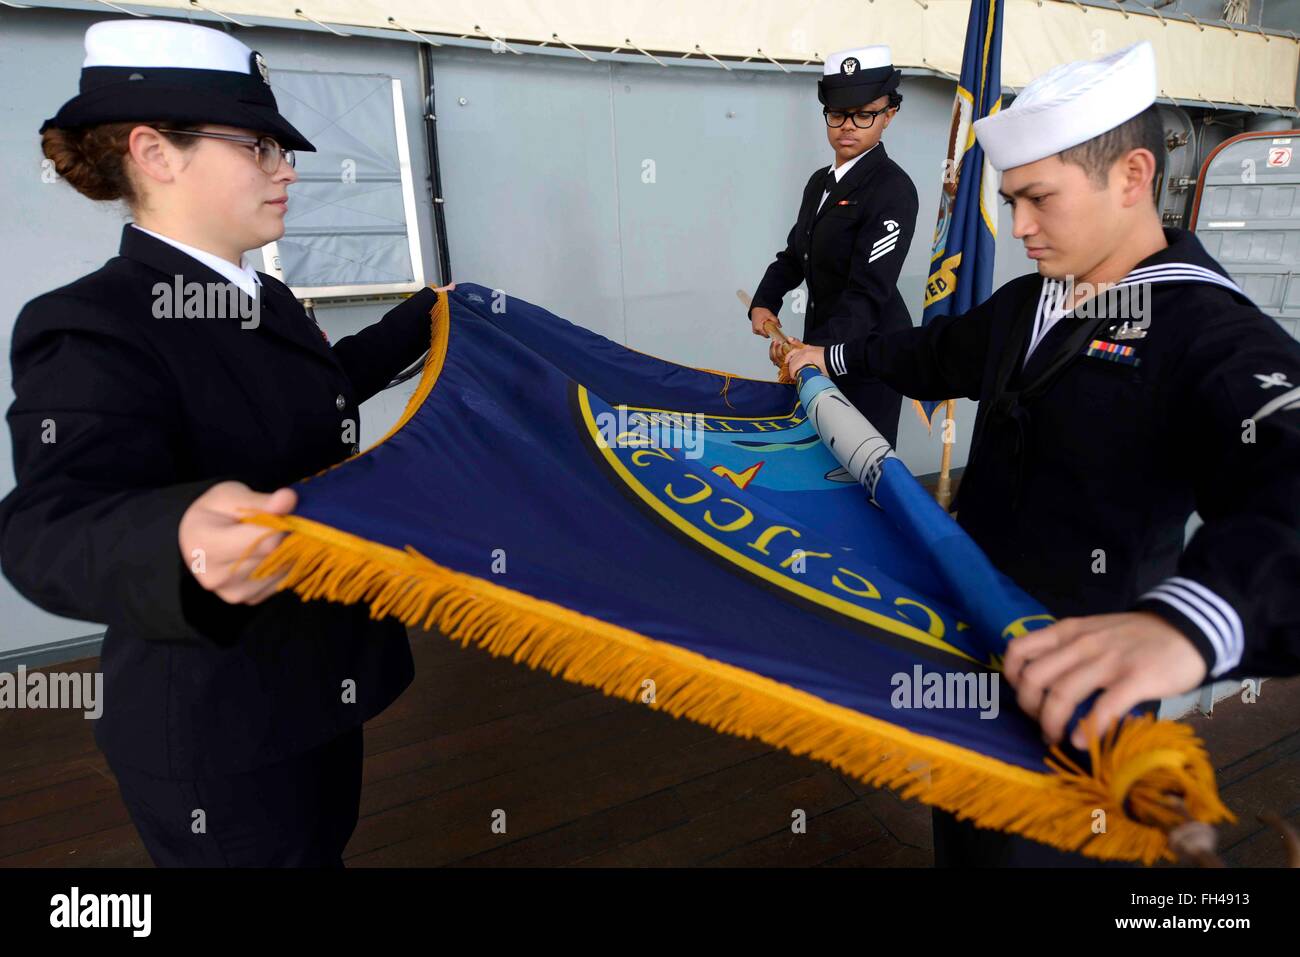 Italy (Feb. 22, 2016) Sailors aboard the U.S. 6th Fleet command and control ship USS Mount Whitney (LCC 20) secure the command pennant after the flagship departed Gaeta, Italy, Feb. 22, 2016. Mount Whitney, the U.S. 6th Fleet command and control ship, forward deployed to Gaeta, Italy, is conducting naval operations in the U.S. 6th Fleet area of operations in support  of U.S. National security interests in Europe. Stock Photo